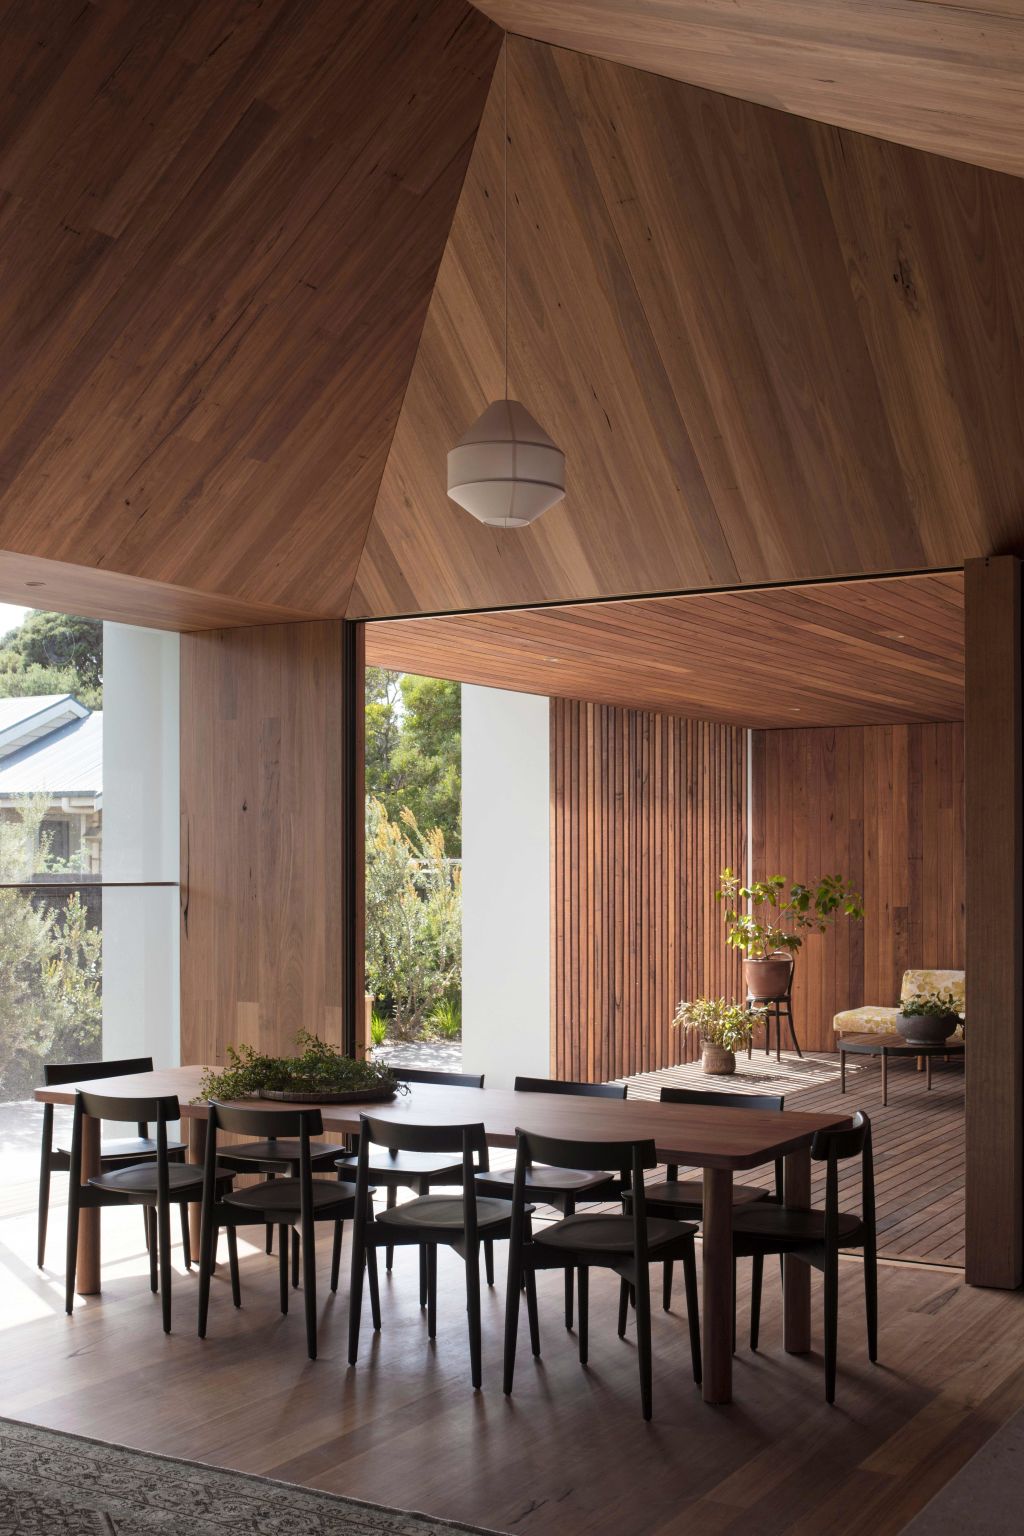 The result is a relaxed, multi-generational holiday house. Photo: Ben Hosking